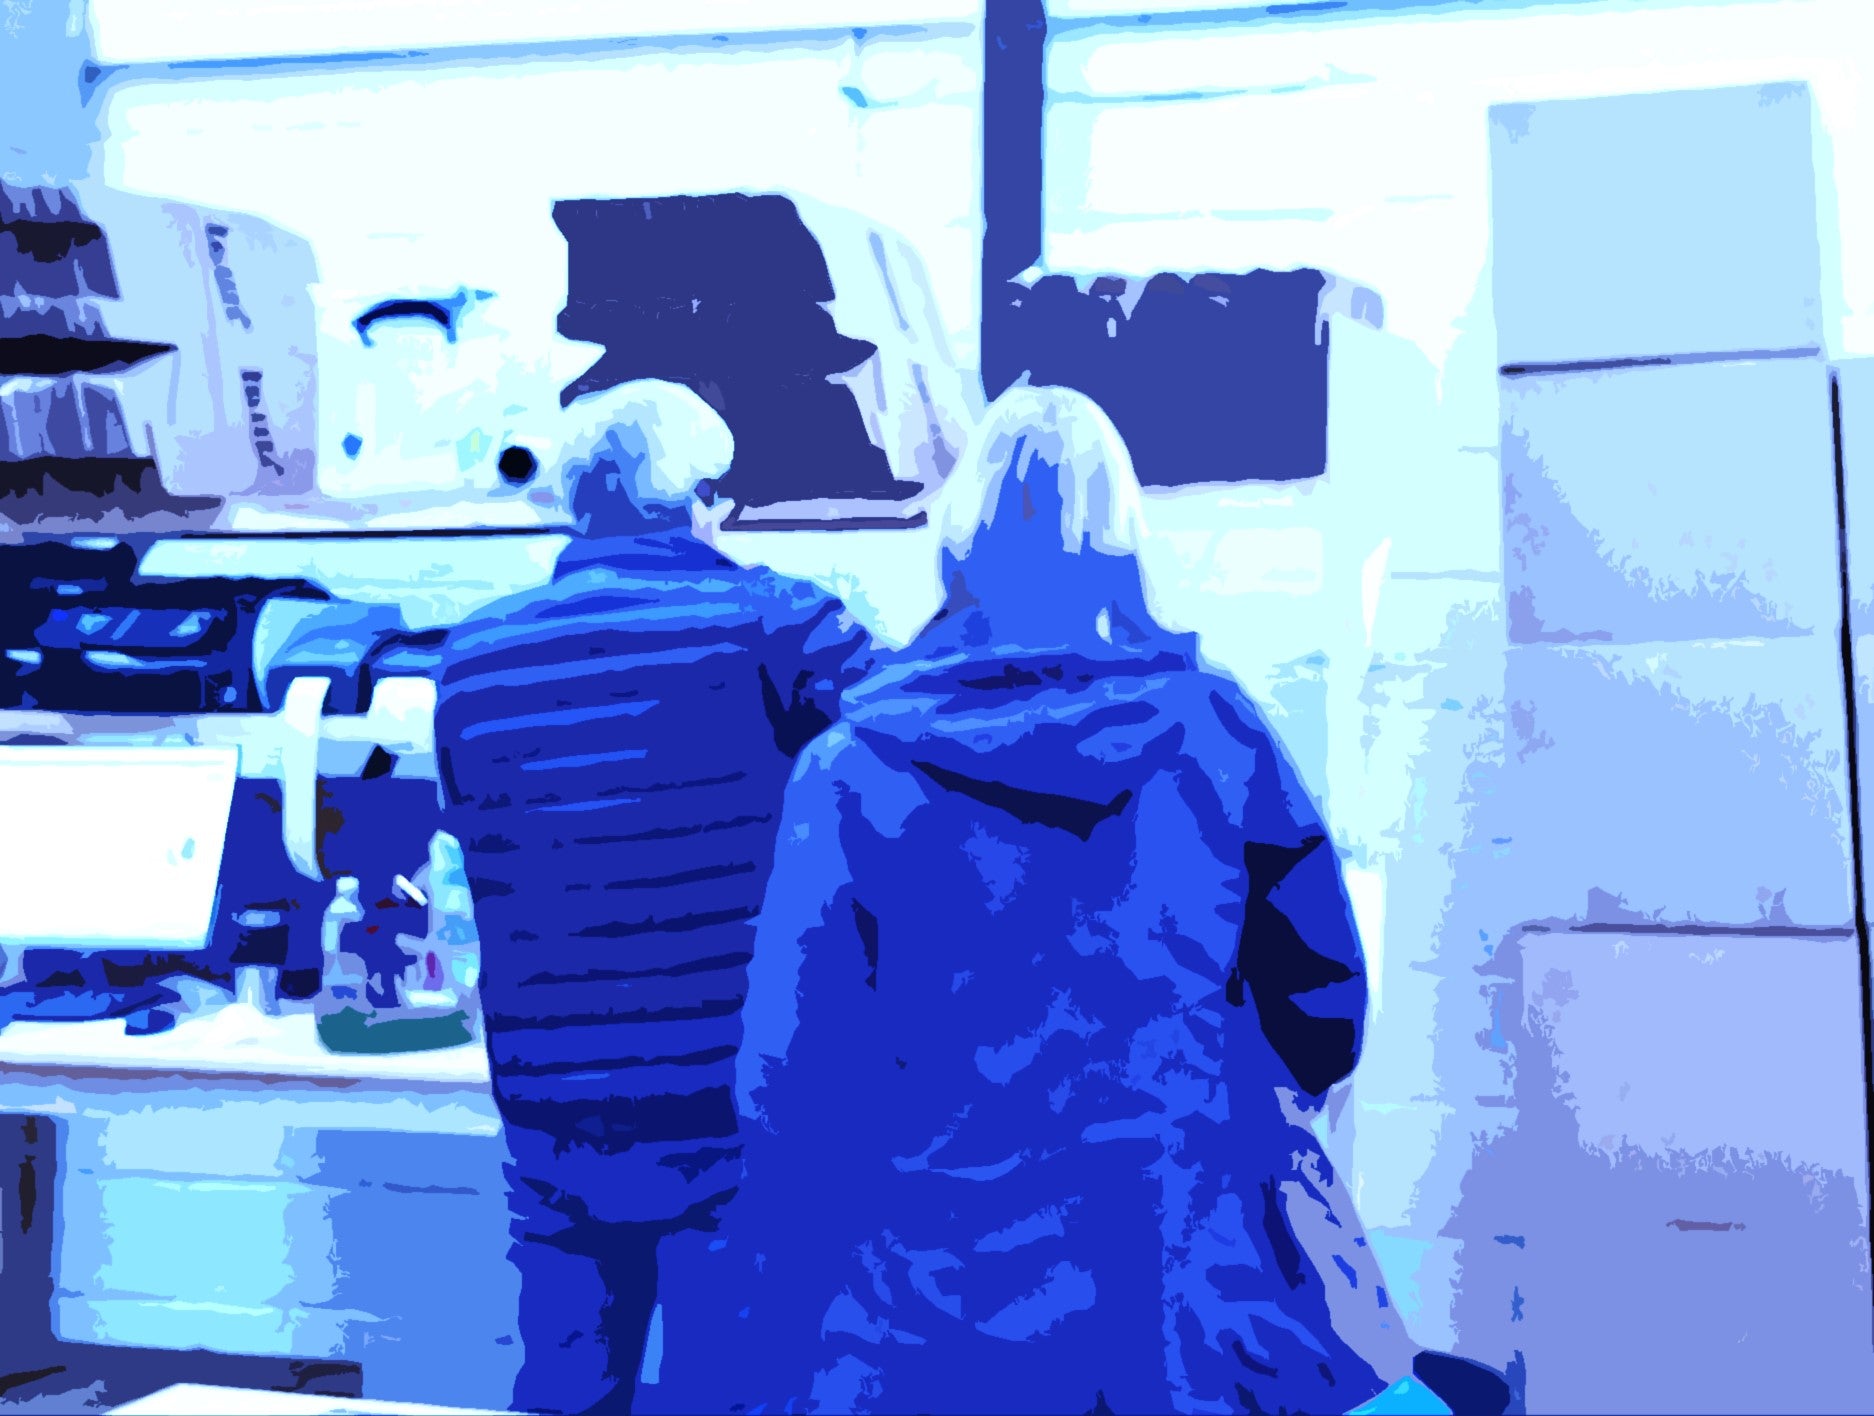 Two people in a warehouse standing by a desk with a blue tint over the image